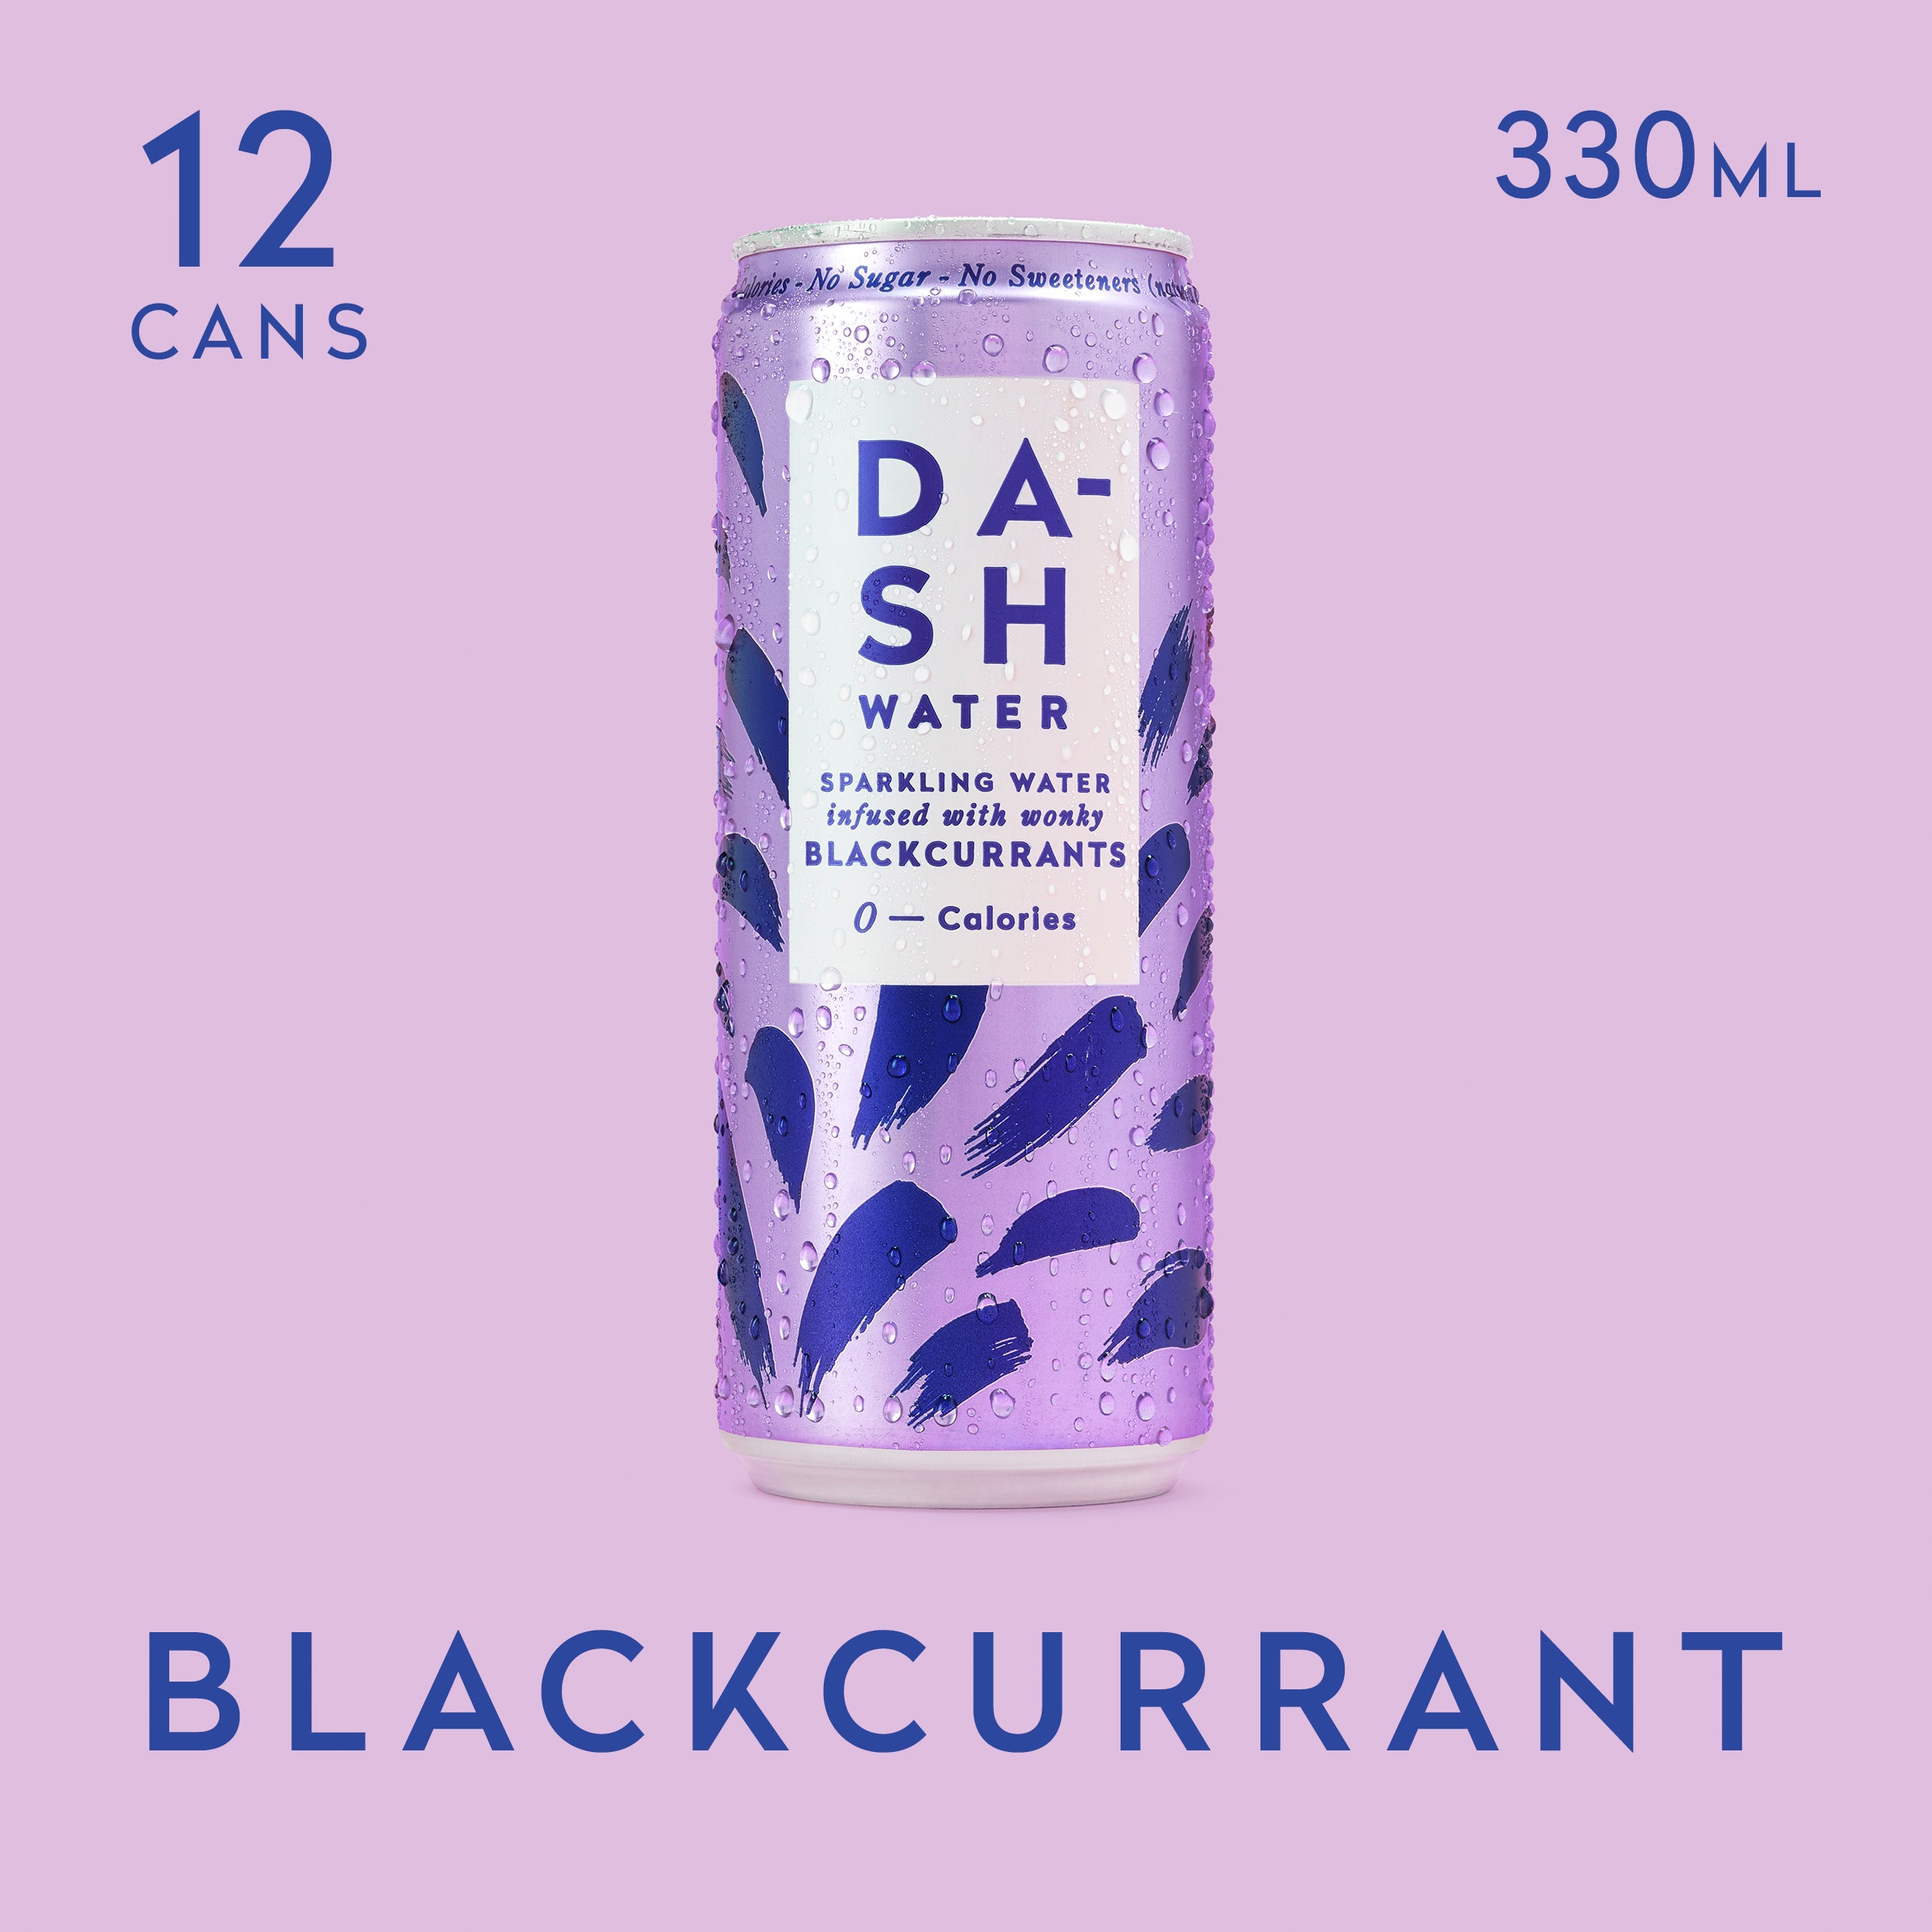 BLACKCURRANT SPARKLING WATER